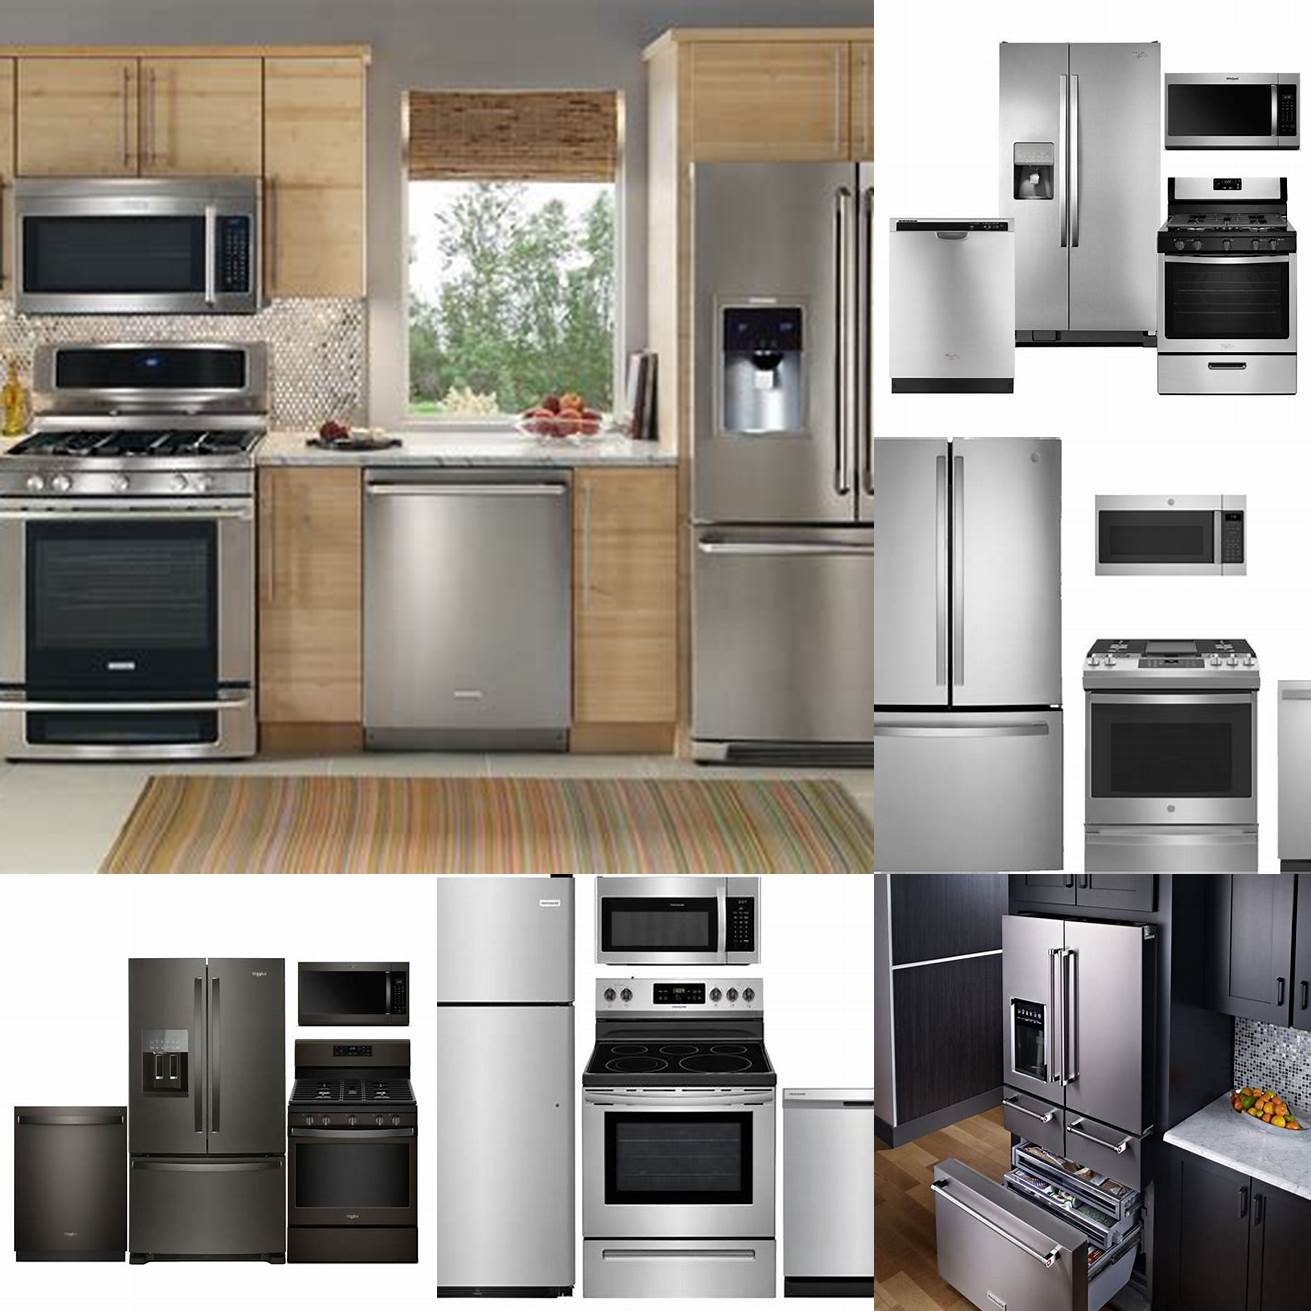 4 Stainless steel appliances